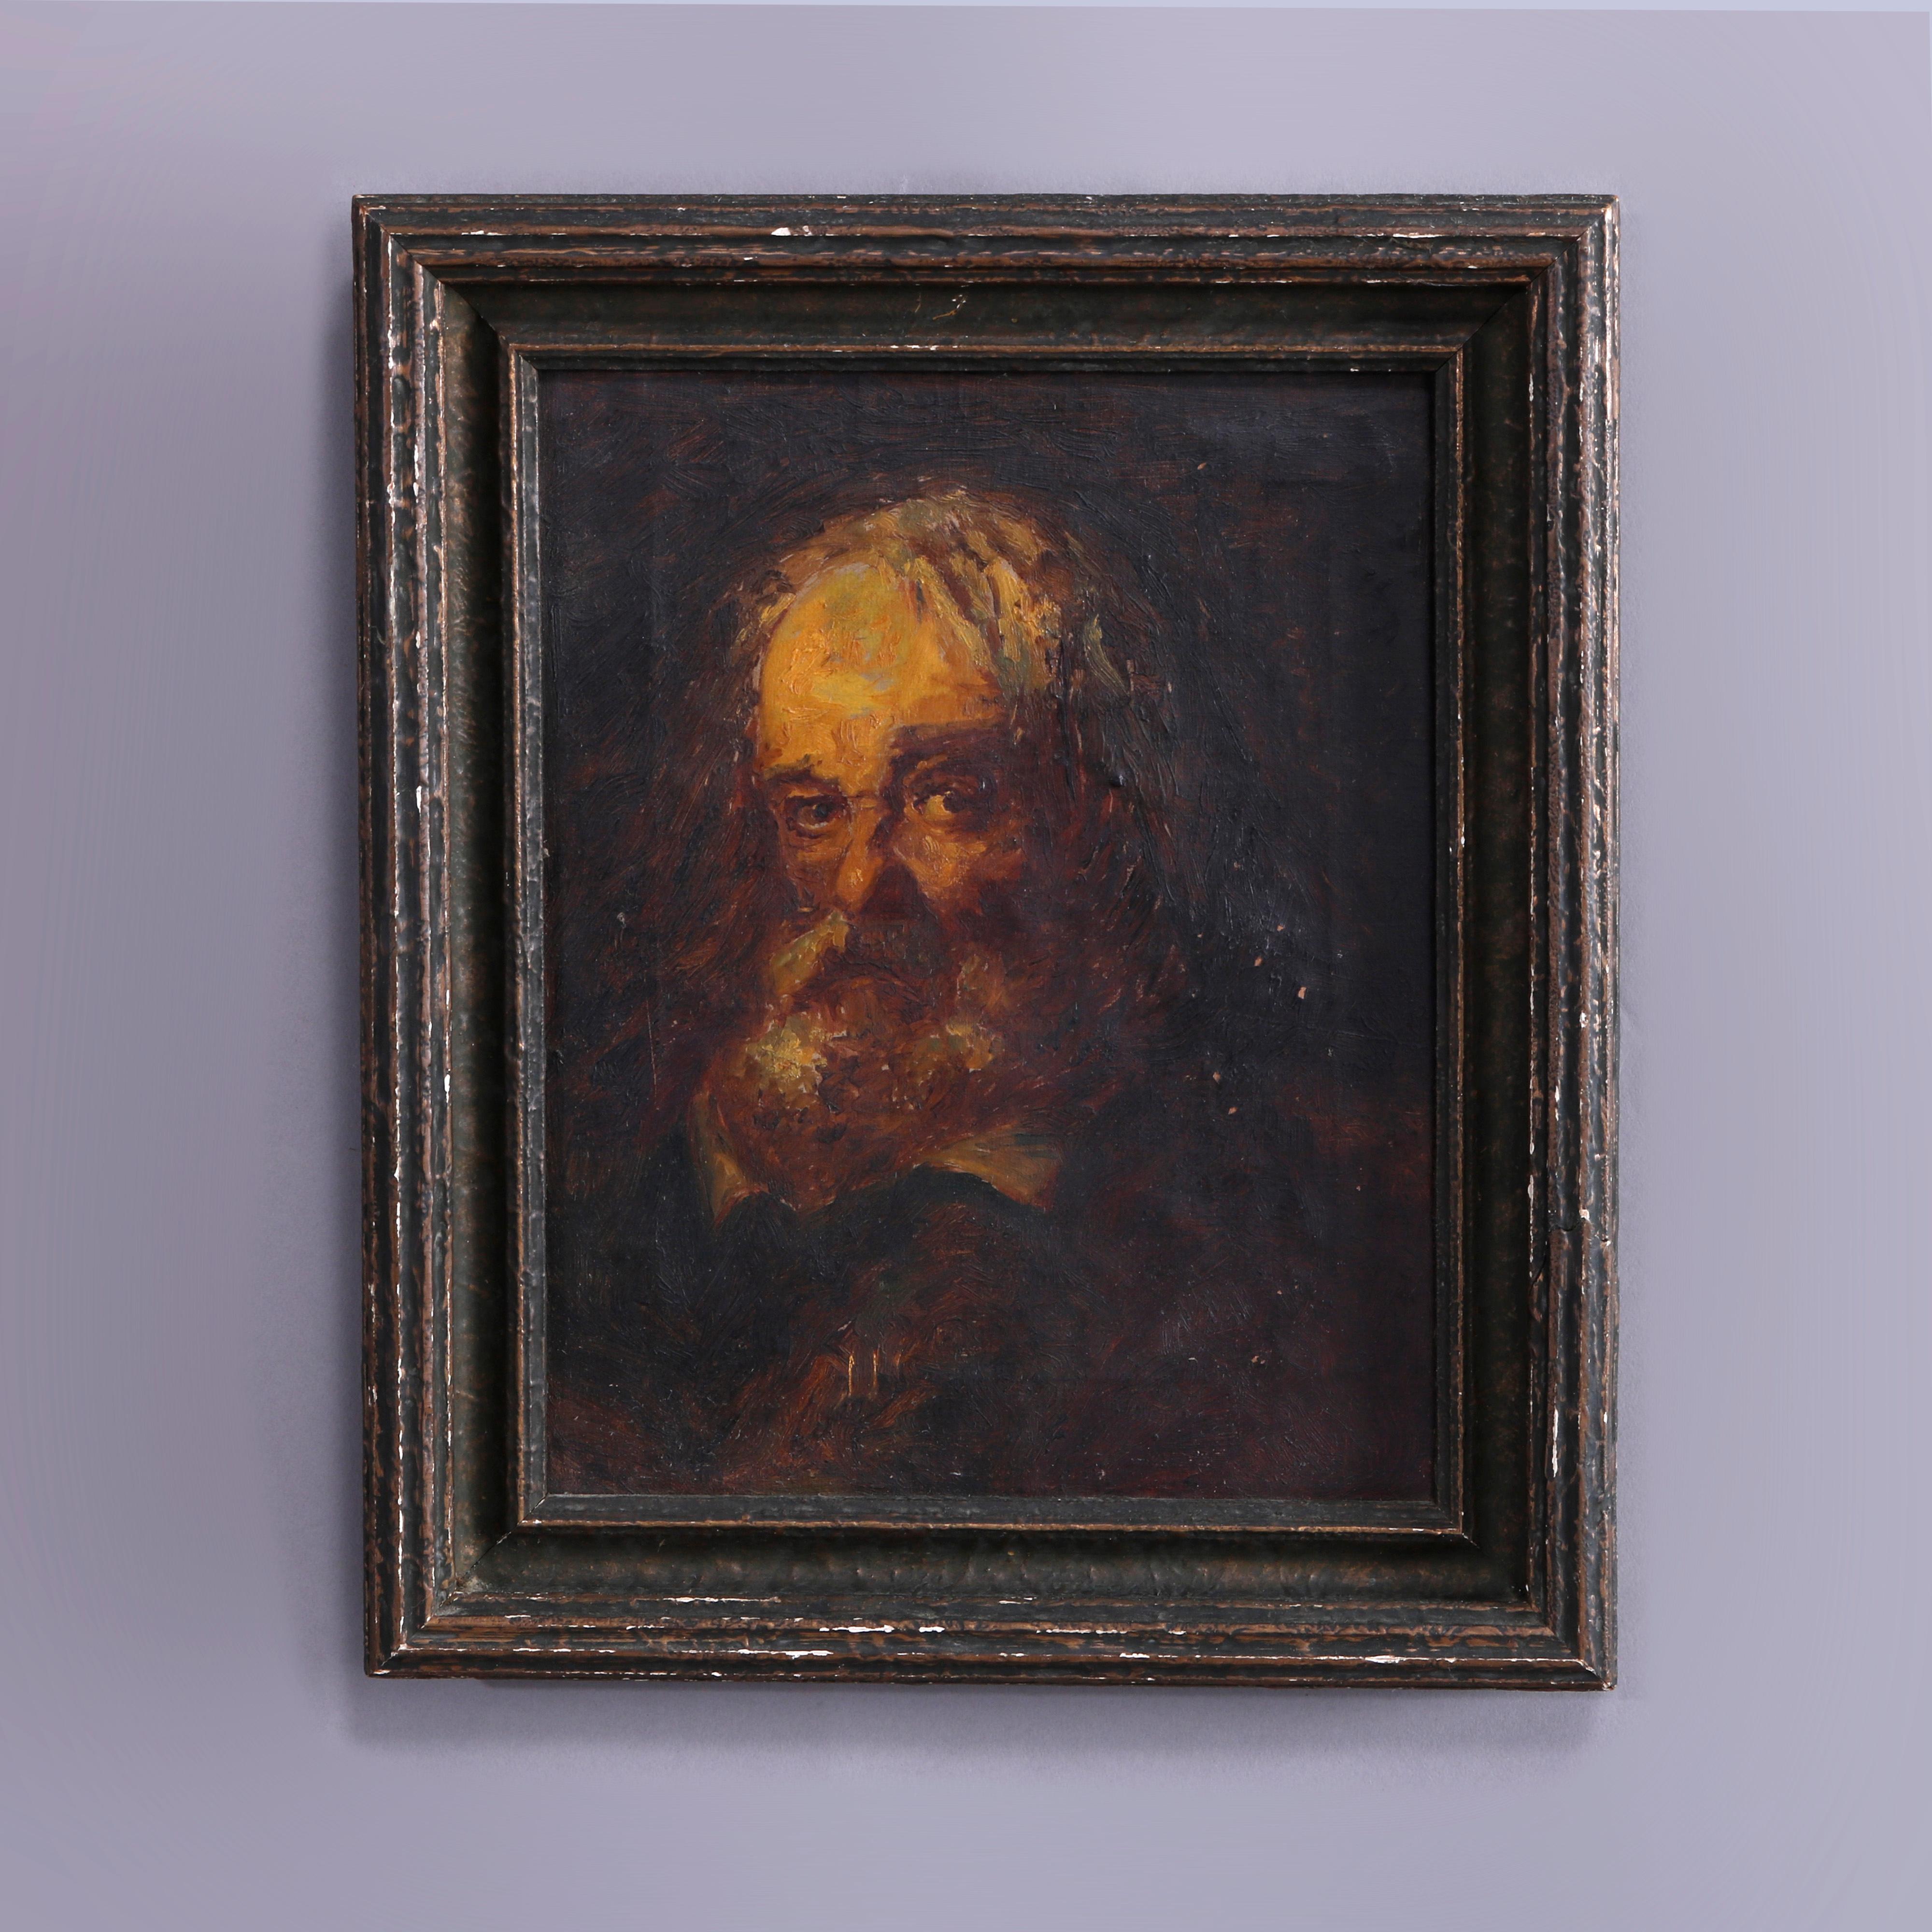 An antique painting offers oil on canvas portrait of a man, 